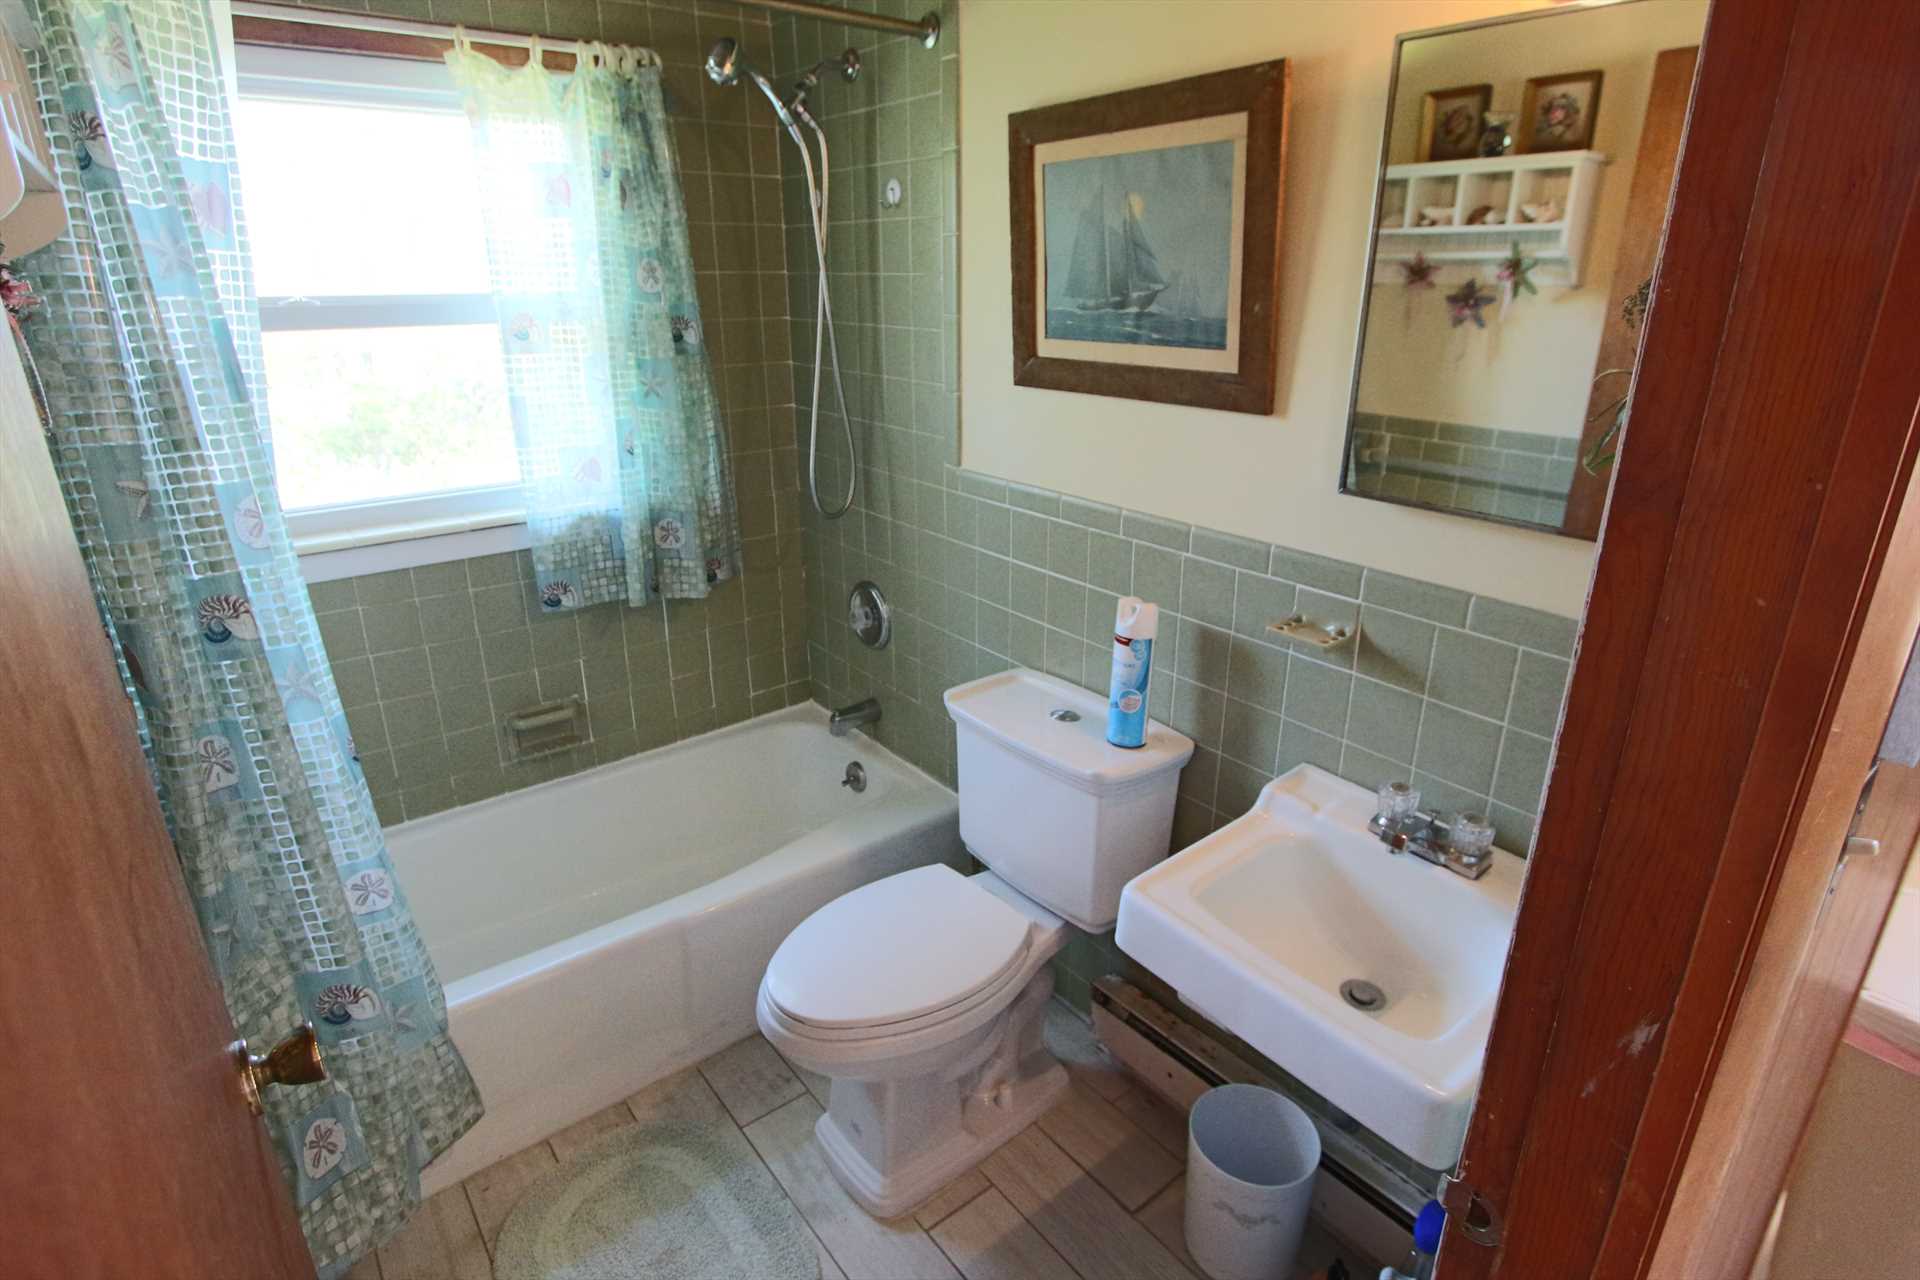 Bathroom with Tub and Shower